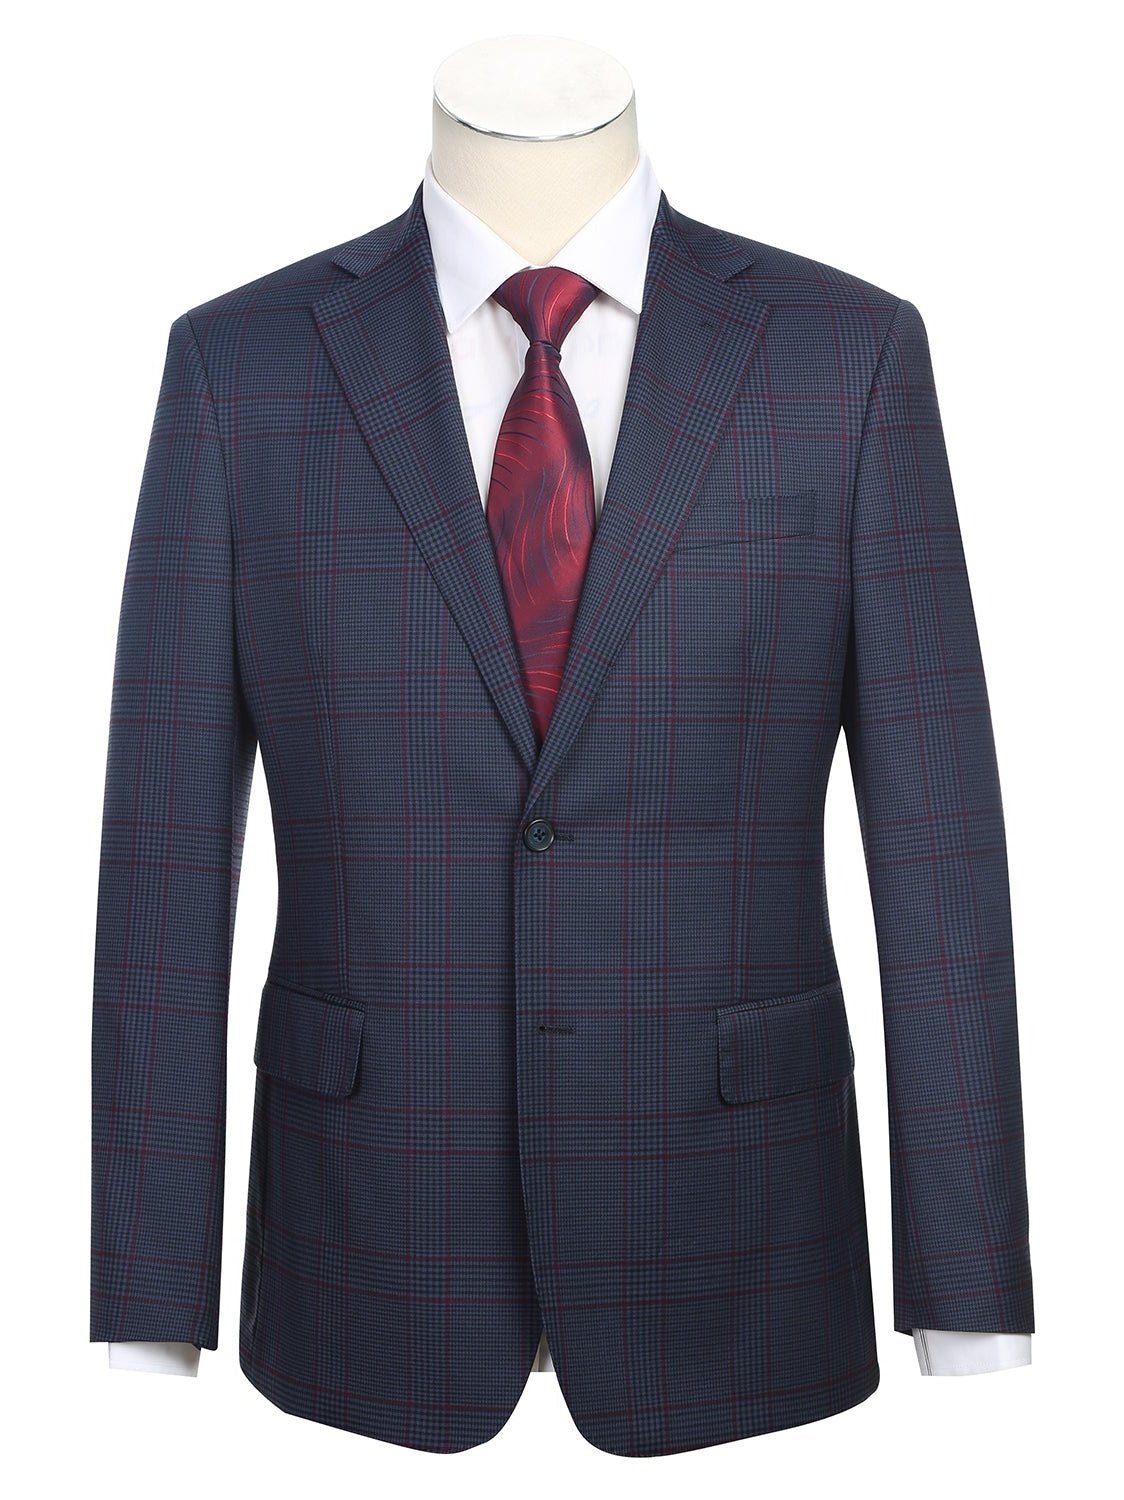 English Laundry Slim Fit Two button Blue with Burgundy Check Peak Lapel Suit